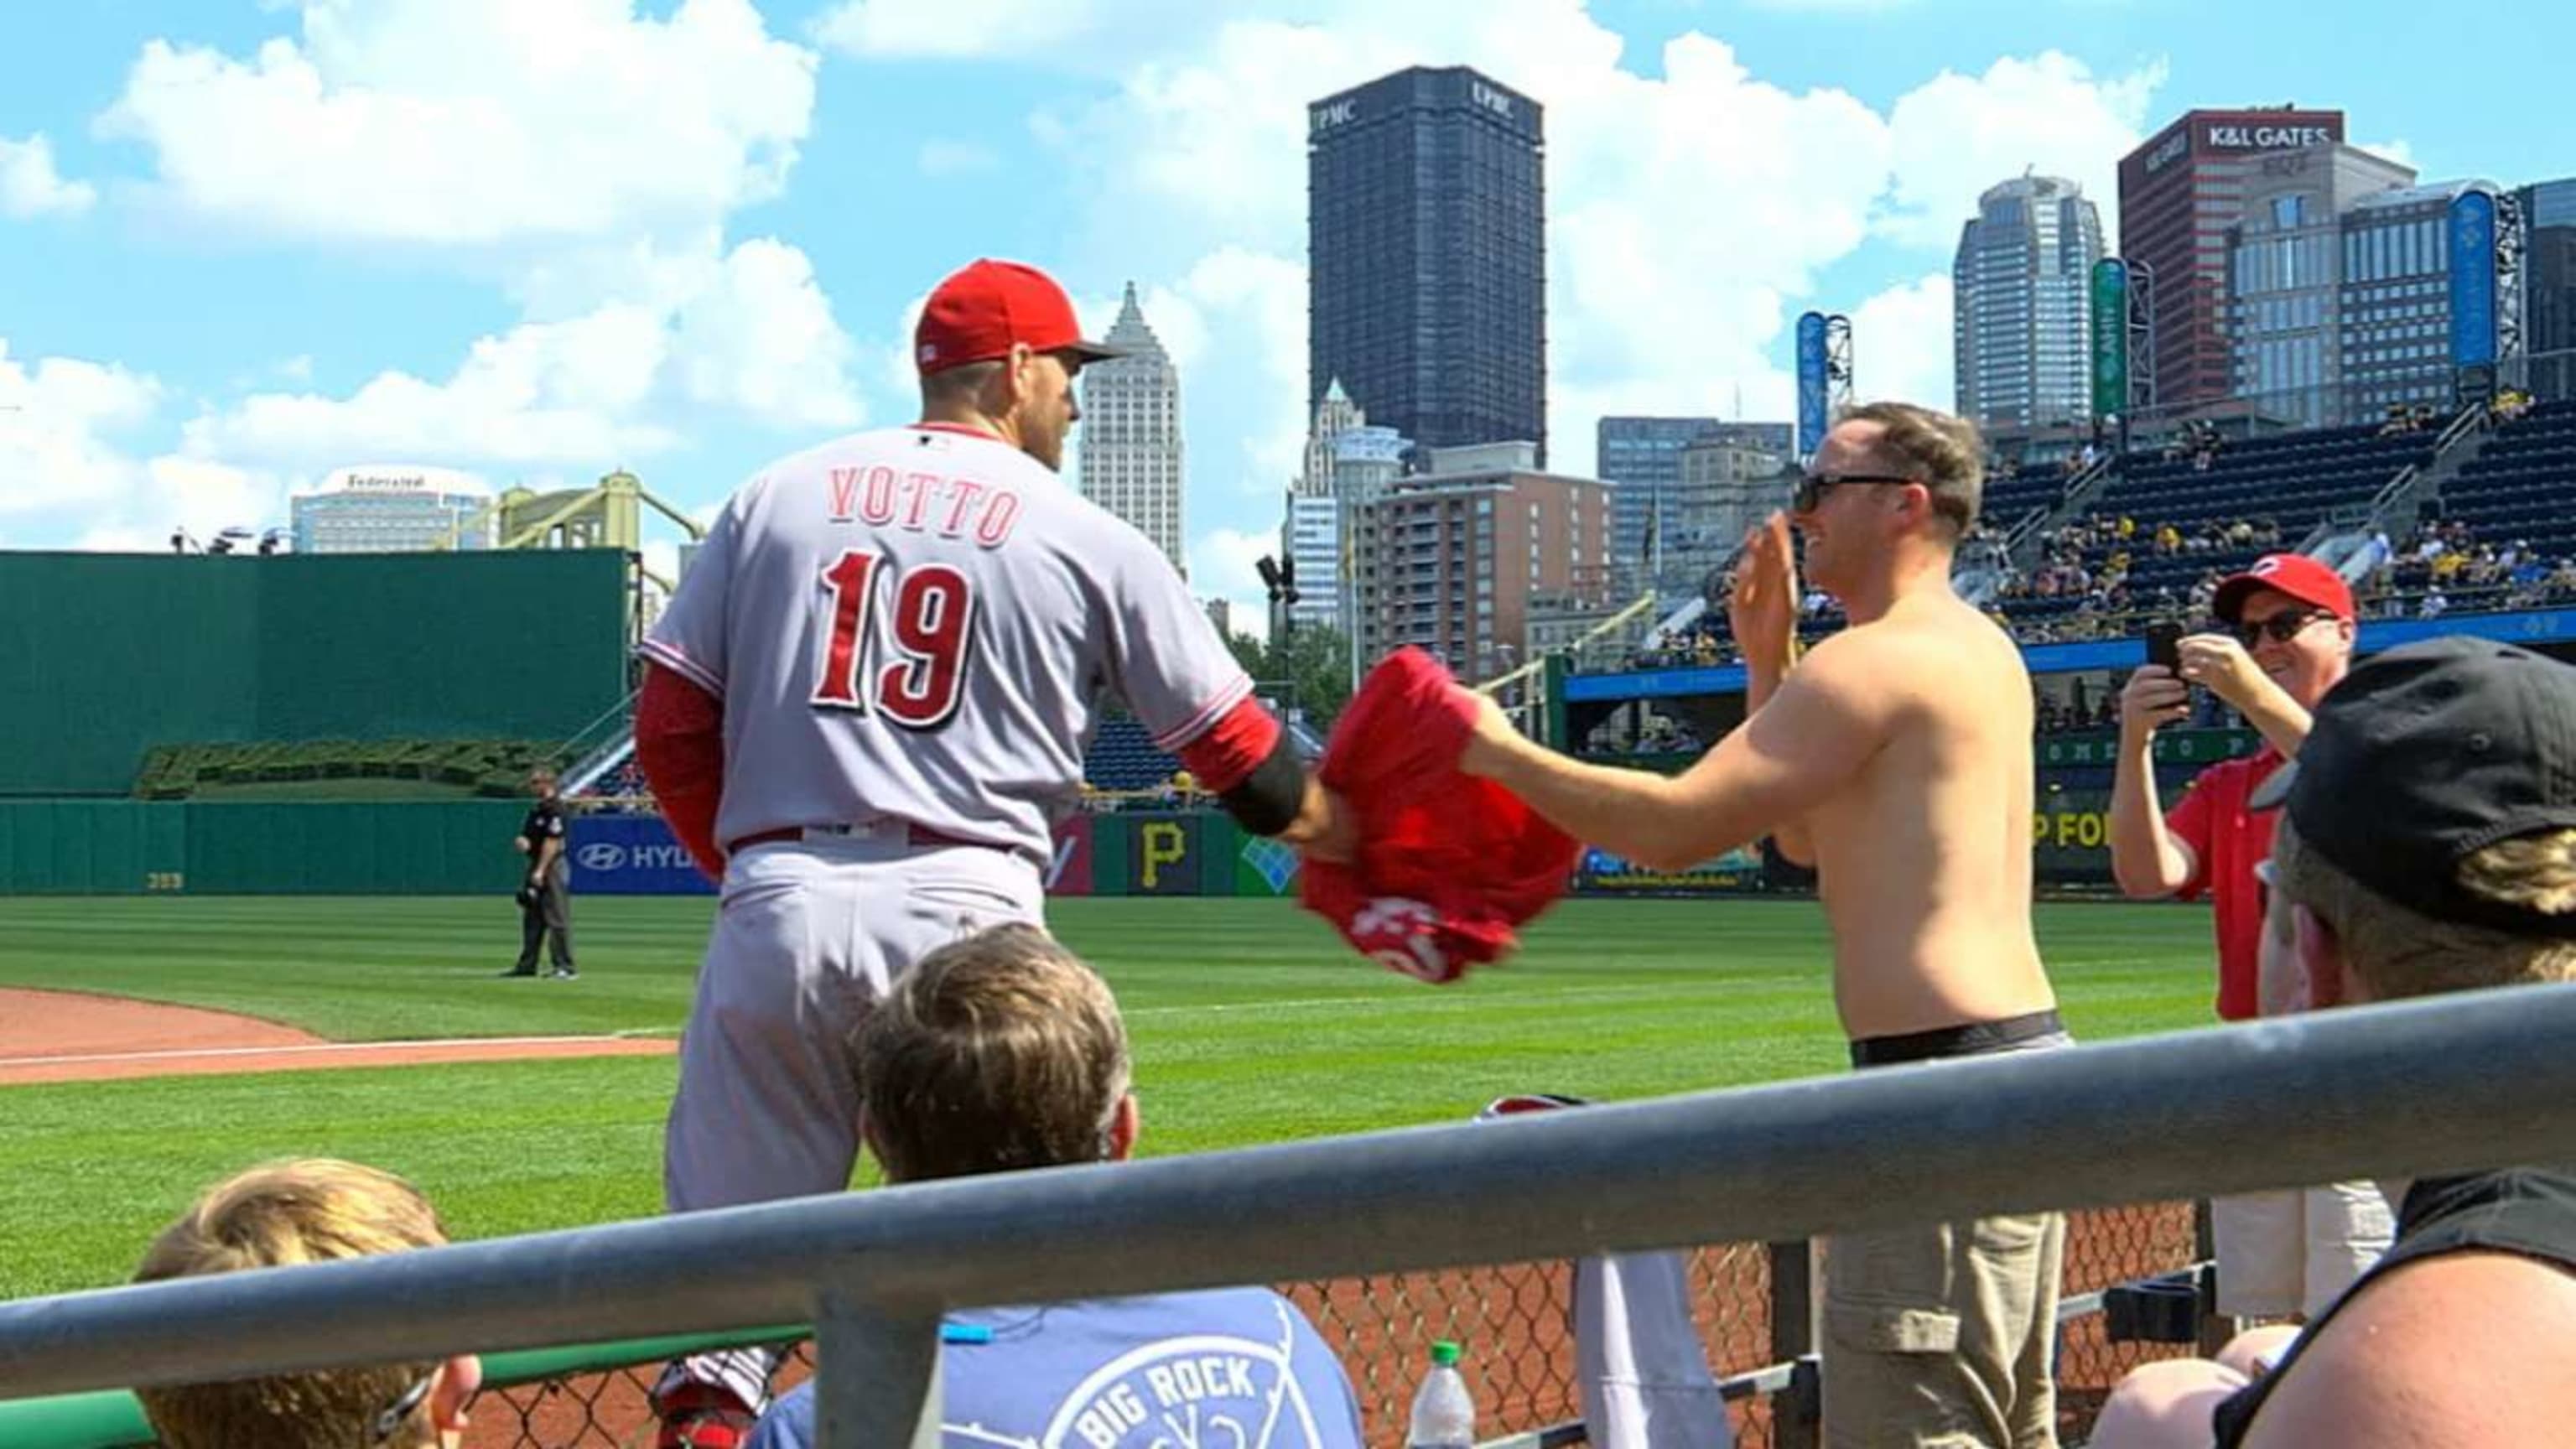 Joey Votto wanted a fan's 'Votto for President' shirt so much he